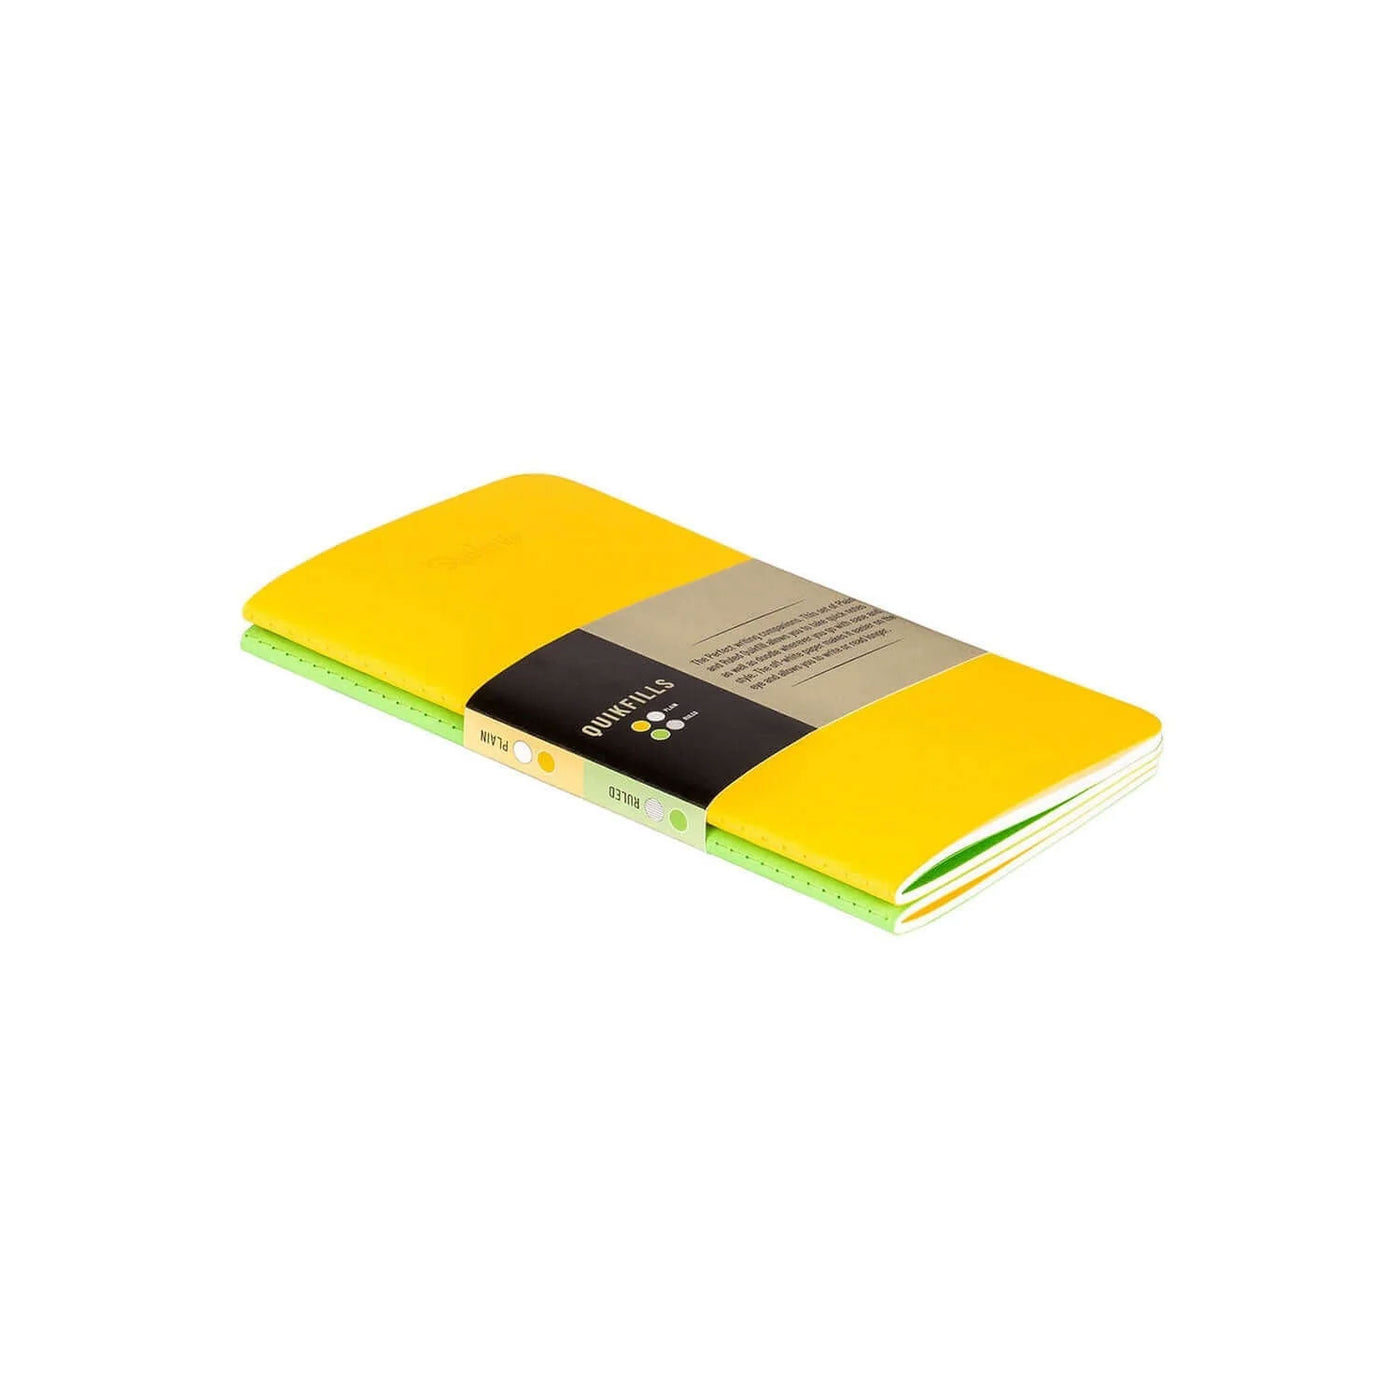 Pennline Quikfill Notebook Refill For Quikrite, Yellow Green - Set Of 2 2